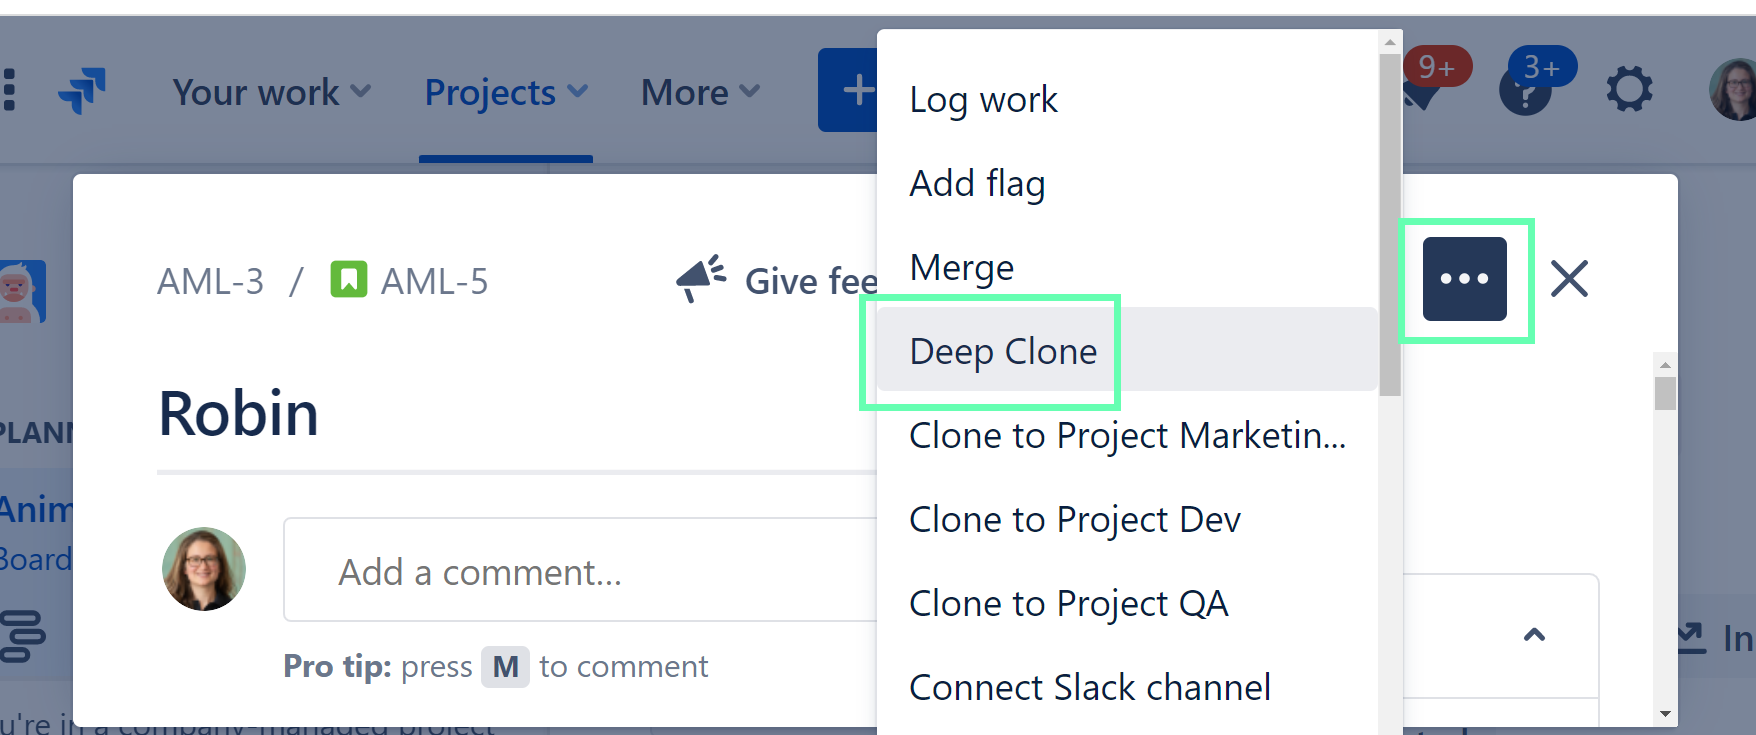 Deep Clone option in the issue actions menu